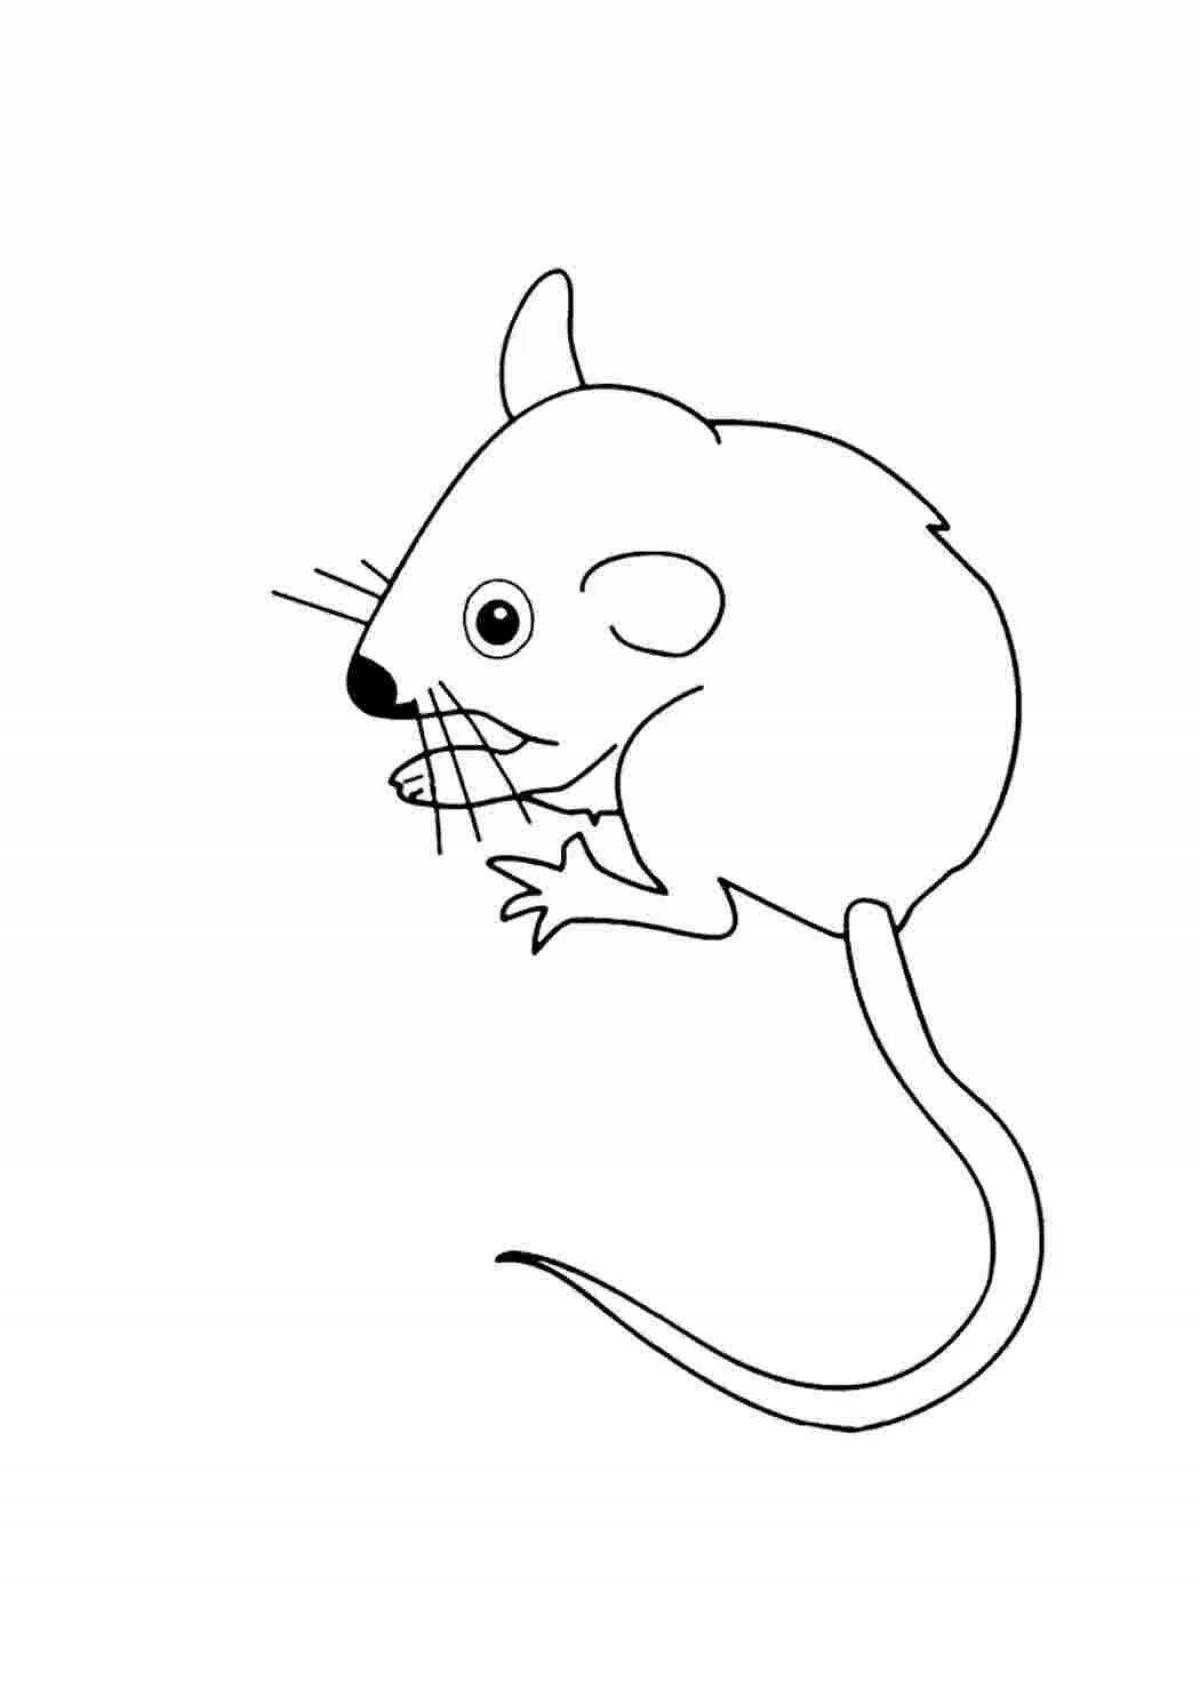 Coloring mouse for children 3-4 years old